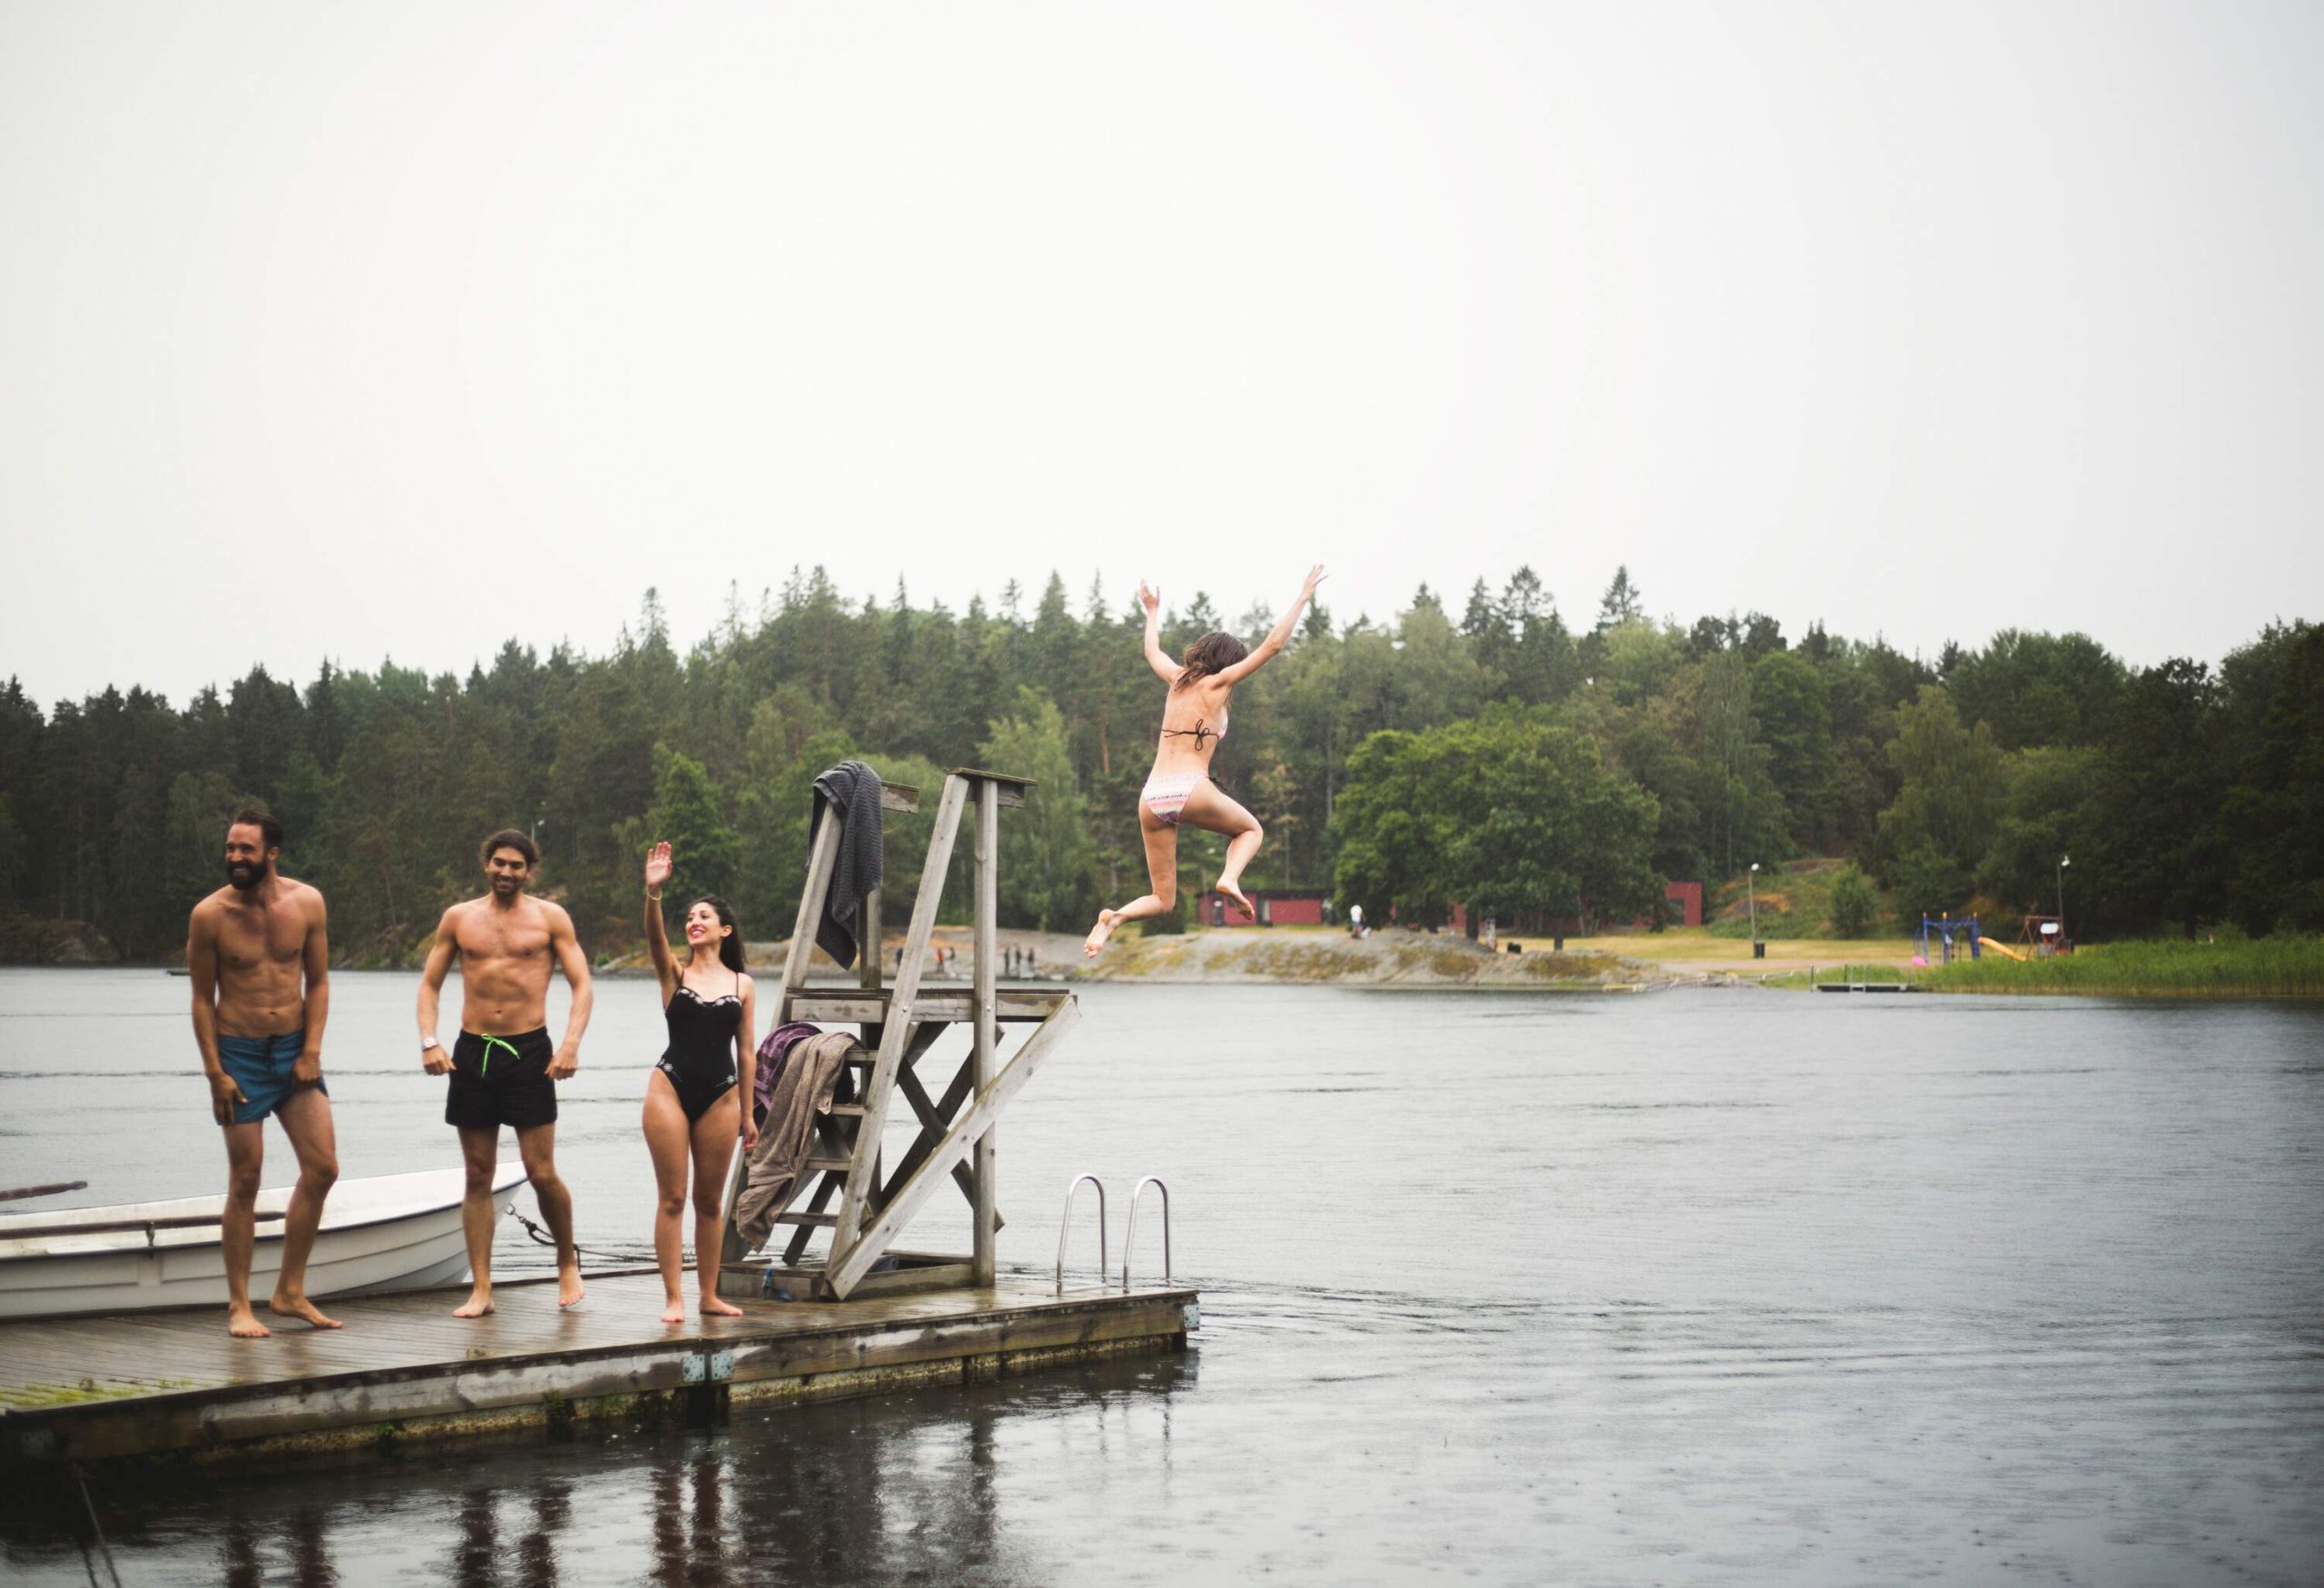 Three people in swimsuits stand on a wooden jetty as a woman leaps from a ledge into a lake.